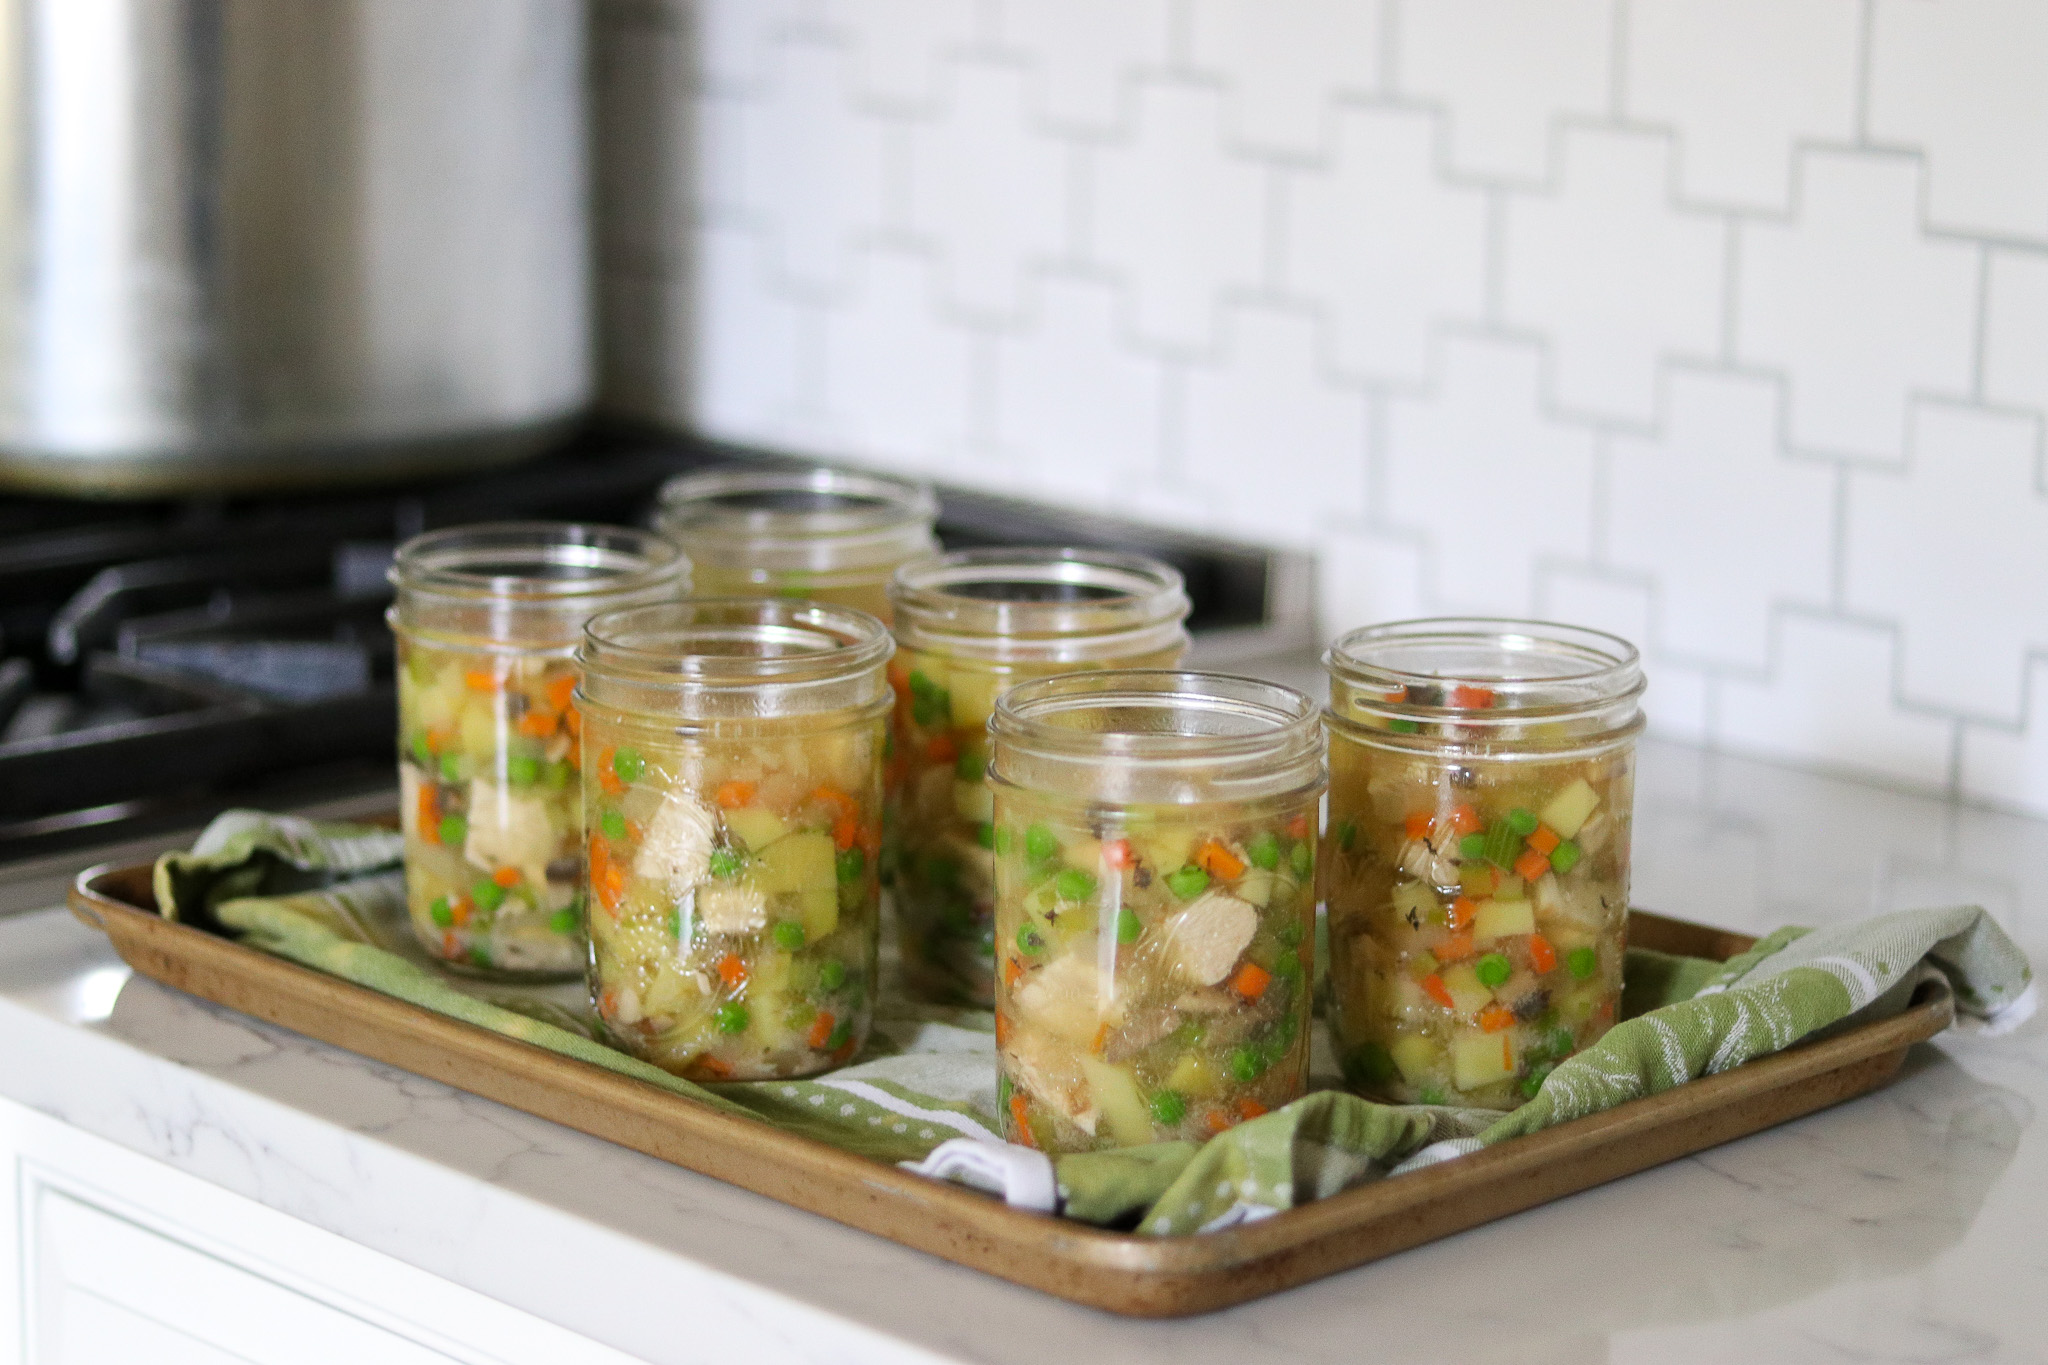 Loaded Jars of Chicken Pot Pie Filling for Canning